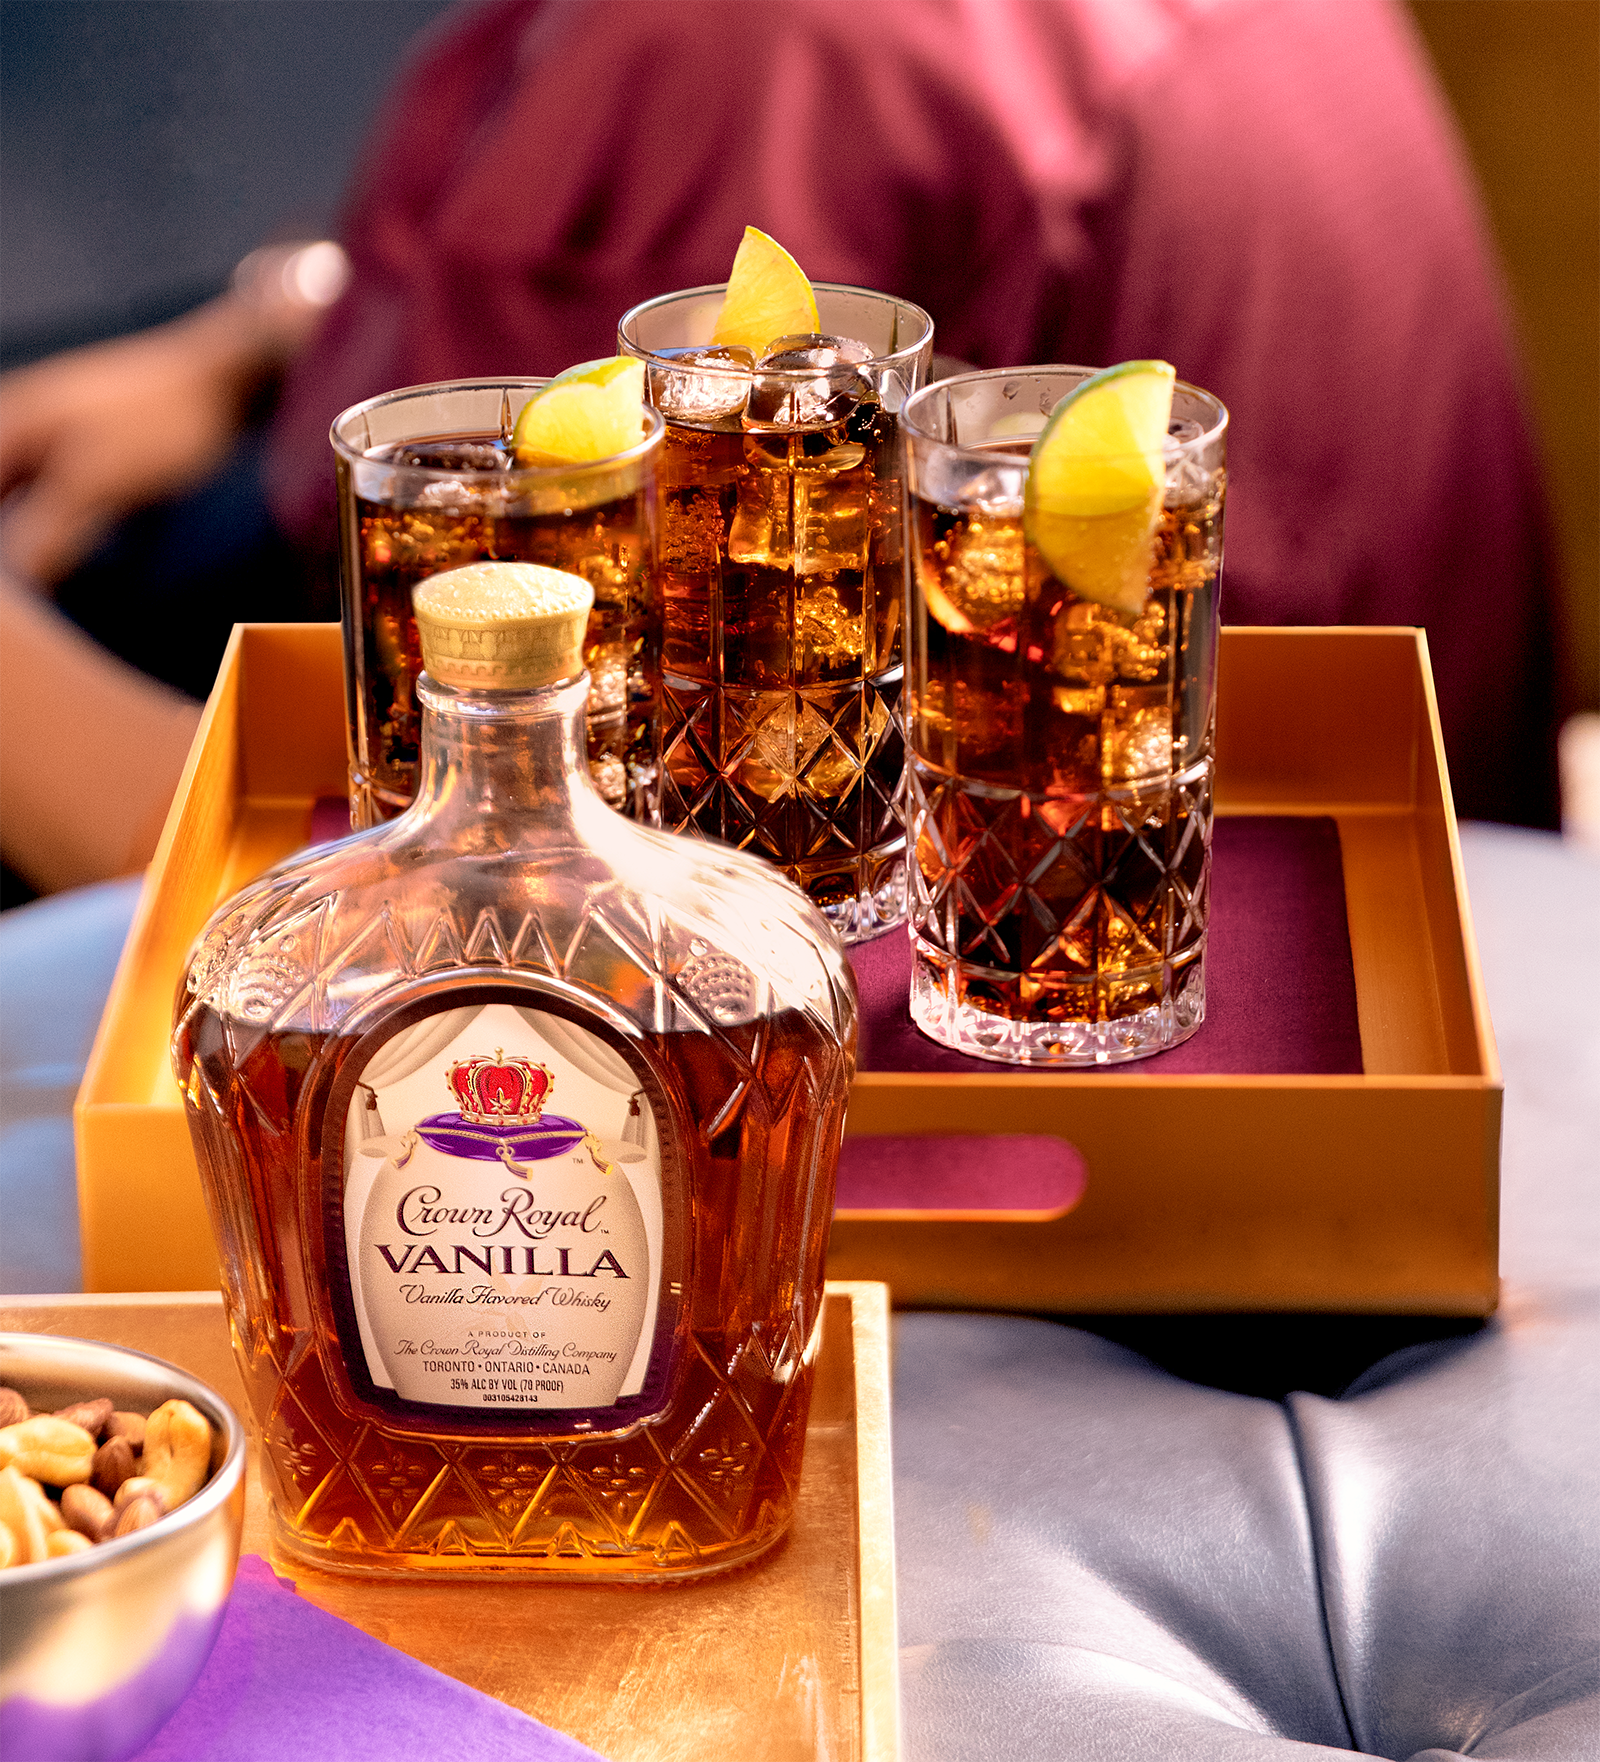 Kickoff Crown Cola Whisky Cocktail with a bottle of Crown Royal Vanilla